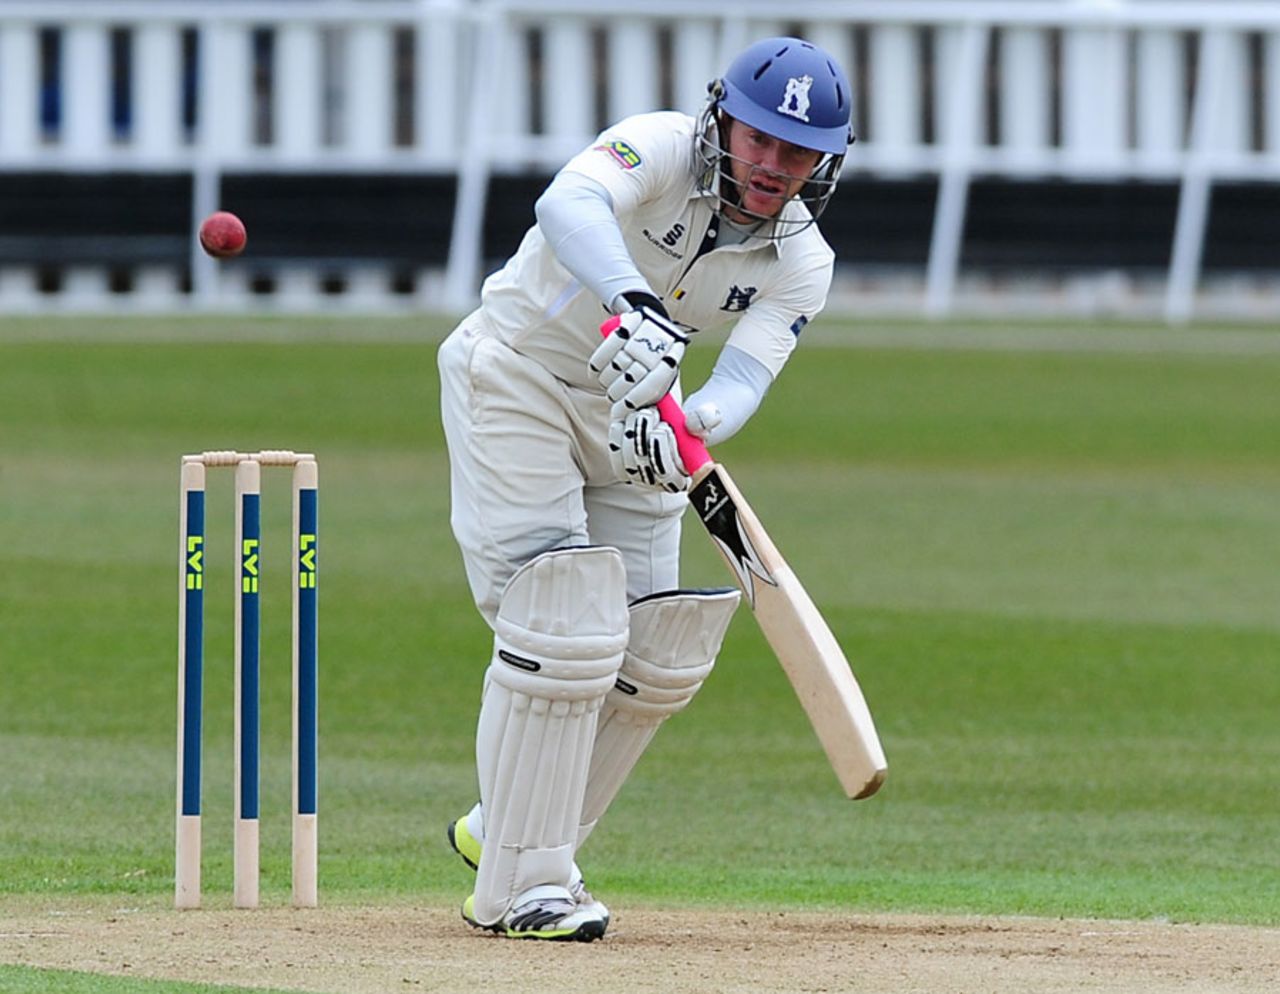 Ian Westwood on his way to a half-century, Warwickshire v Derbyshire, County Championship, Division One, Edgbaston, 4th day, April 12, 2013